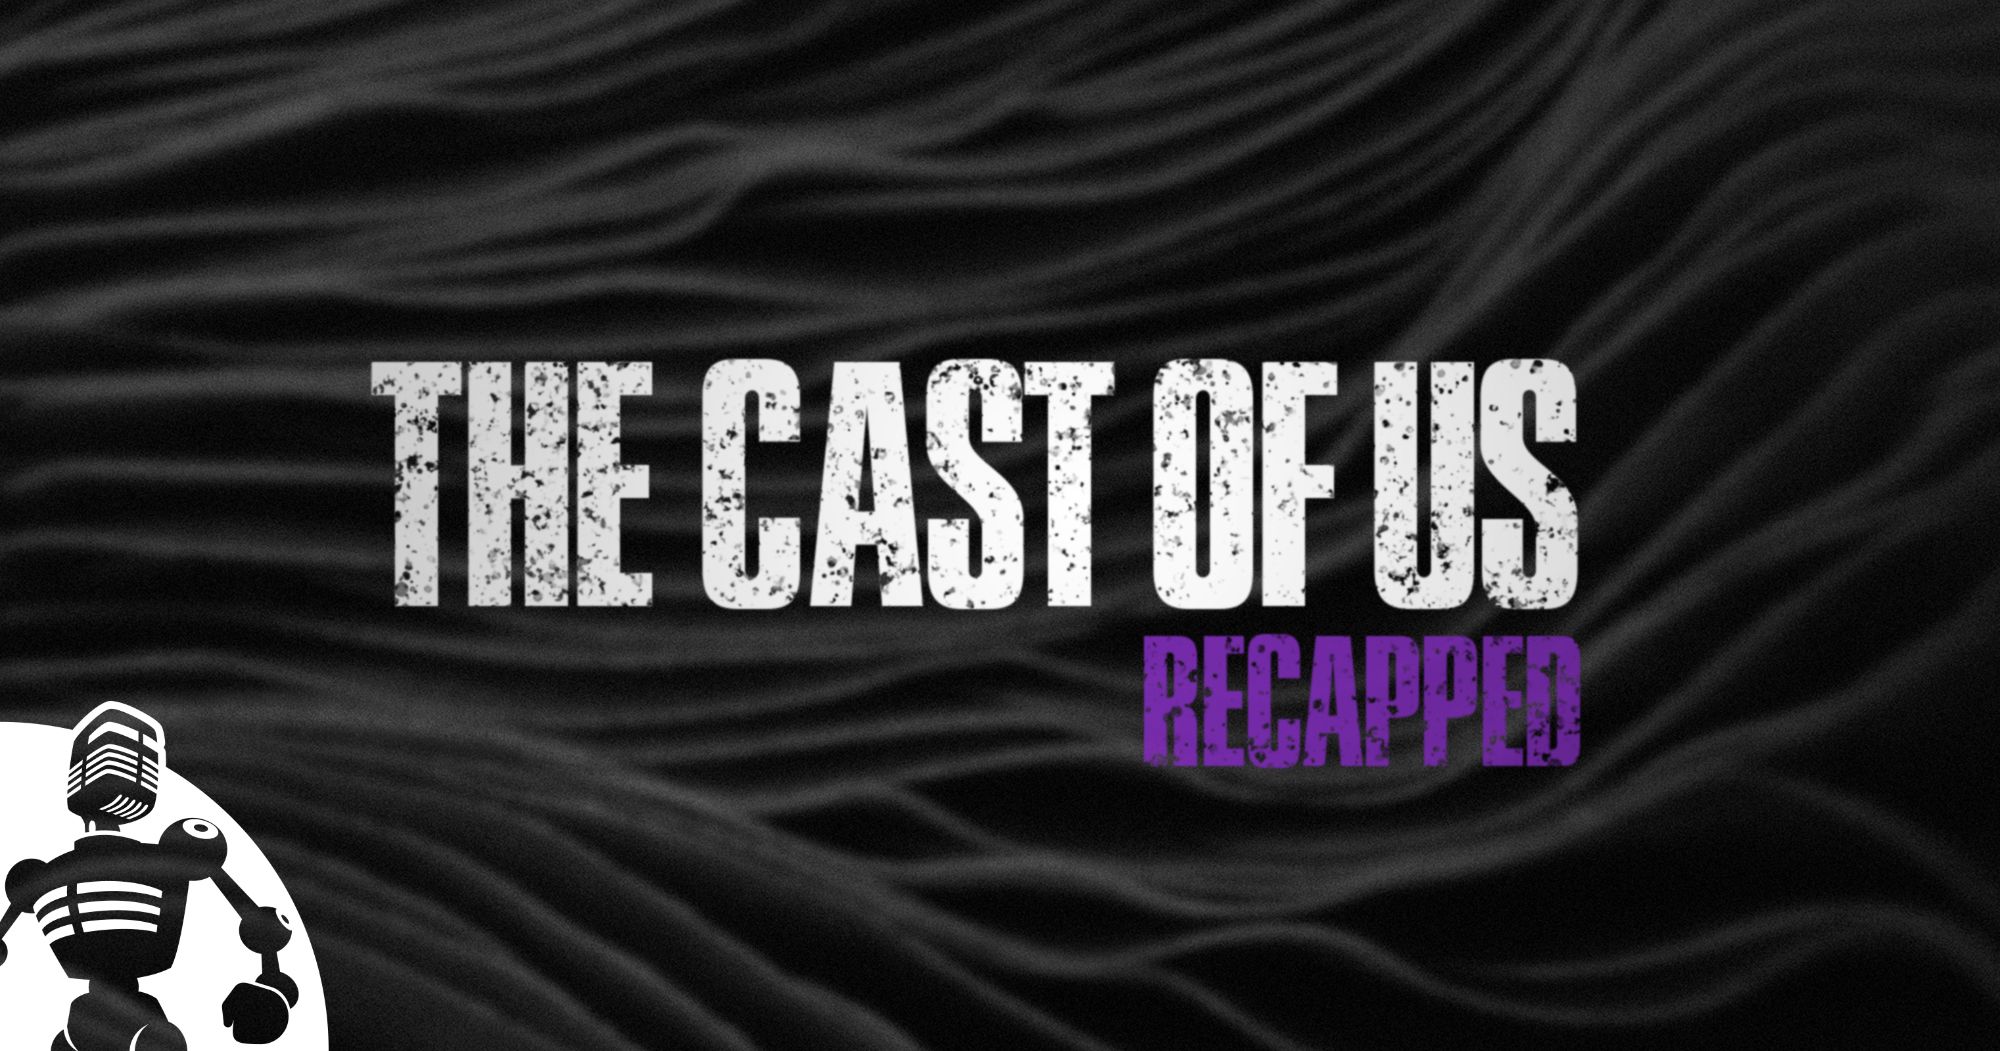 Introducing The Cast of Us: Recapped